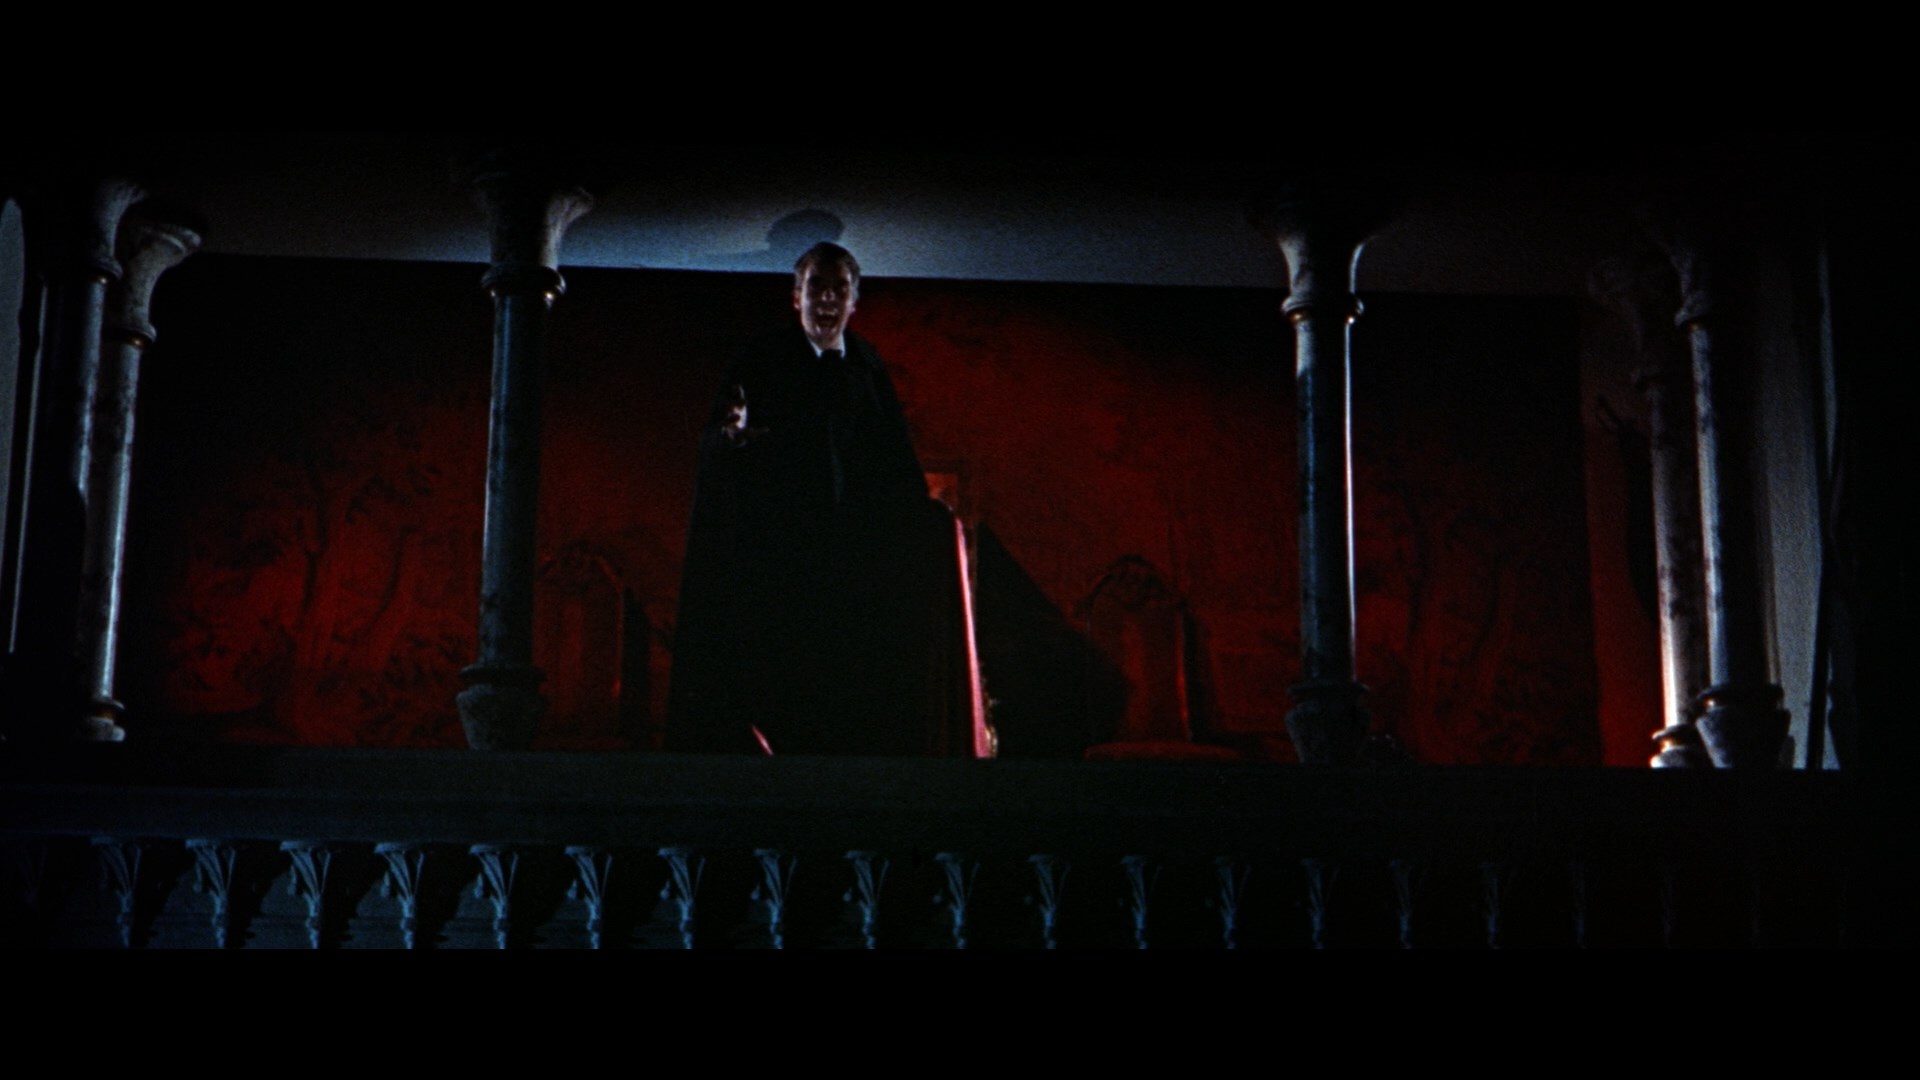 prince of darkness blu ray review